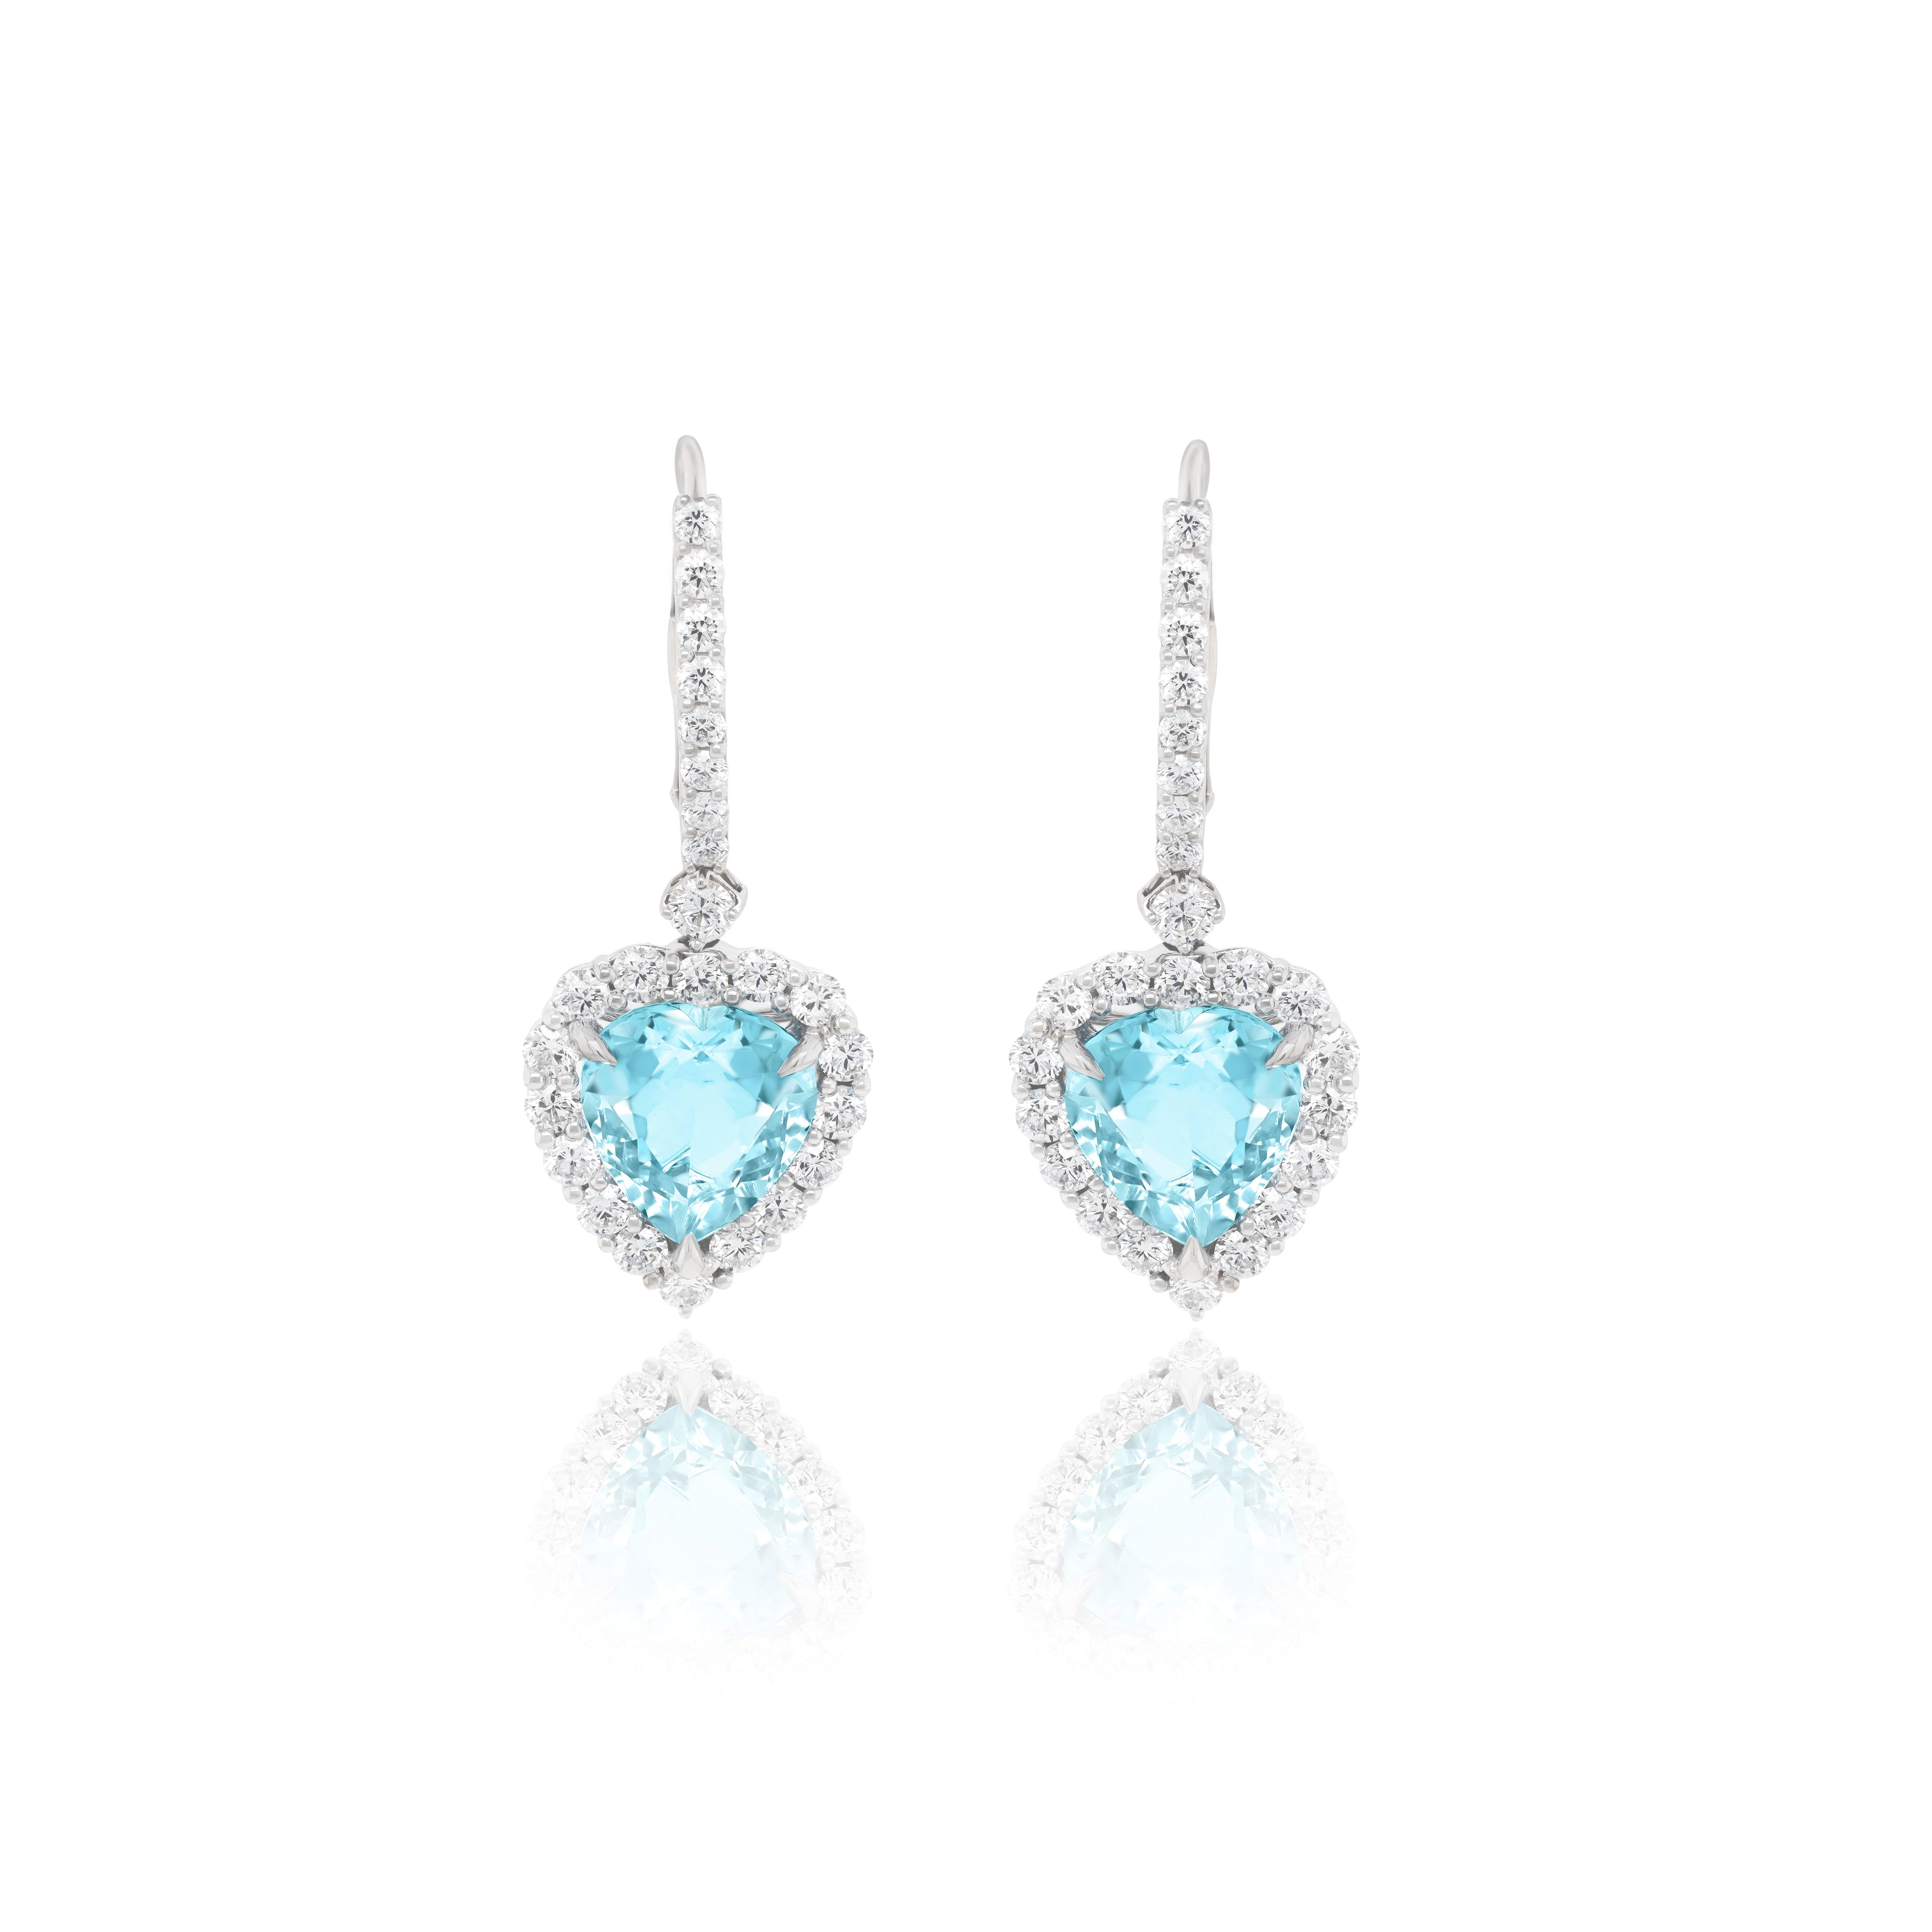 Diana M. 7.70 Carat Aquamarine Heart Center Stone Earrings In New Condition For Sale In New York, NY